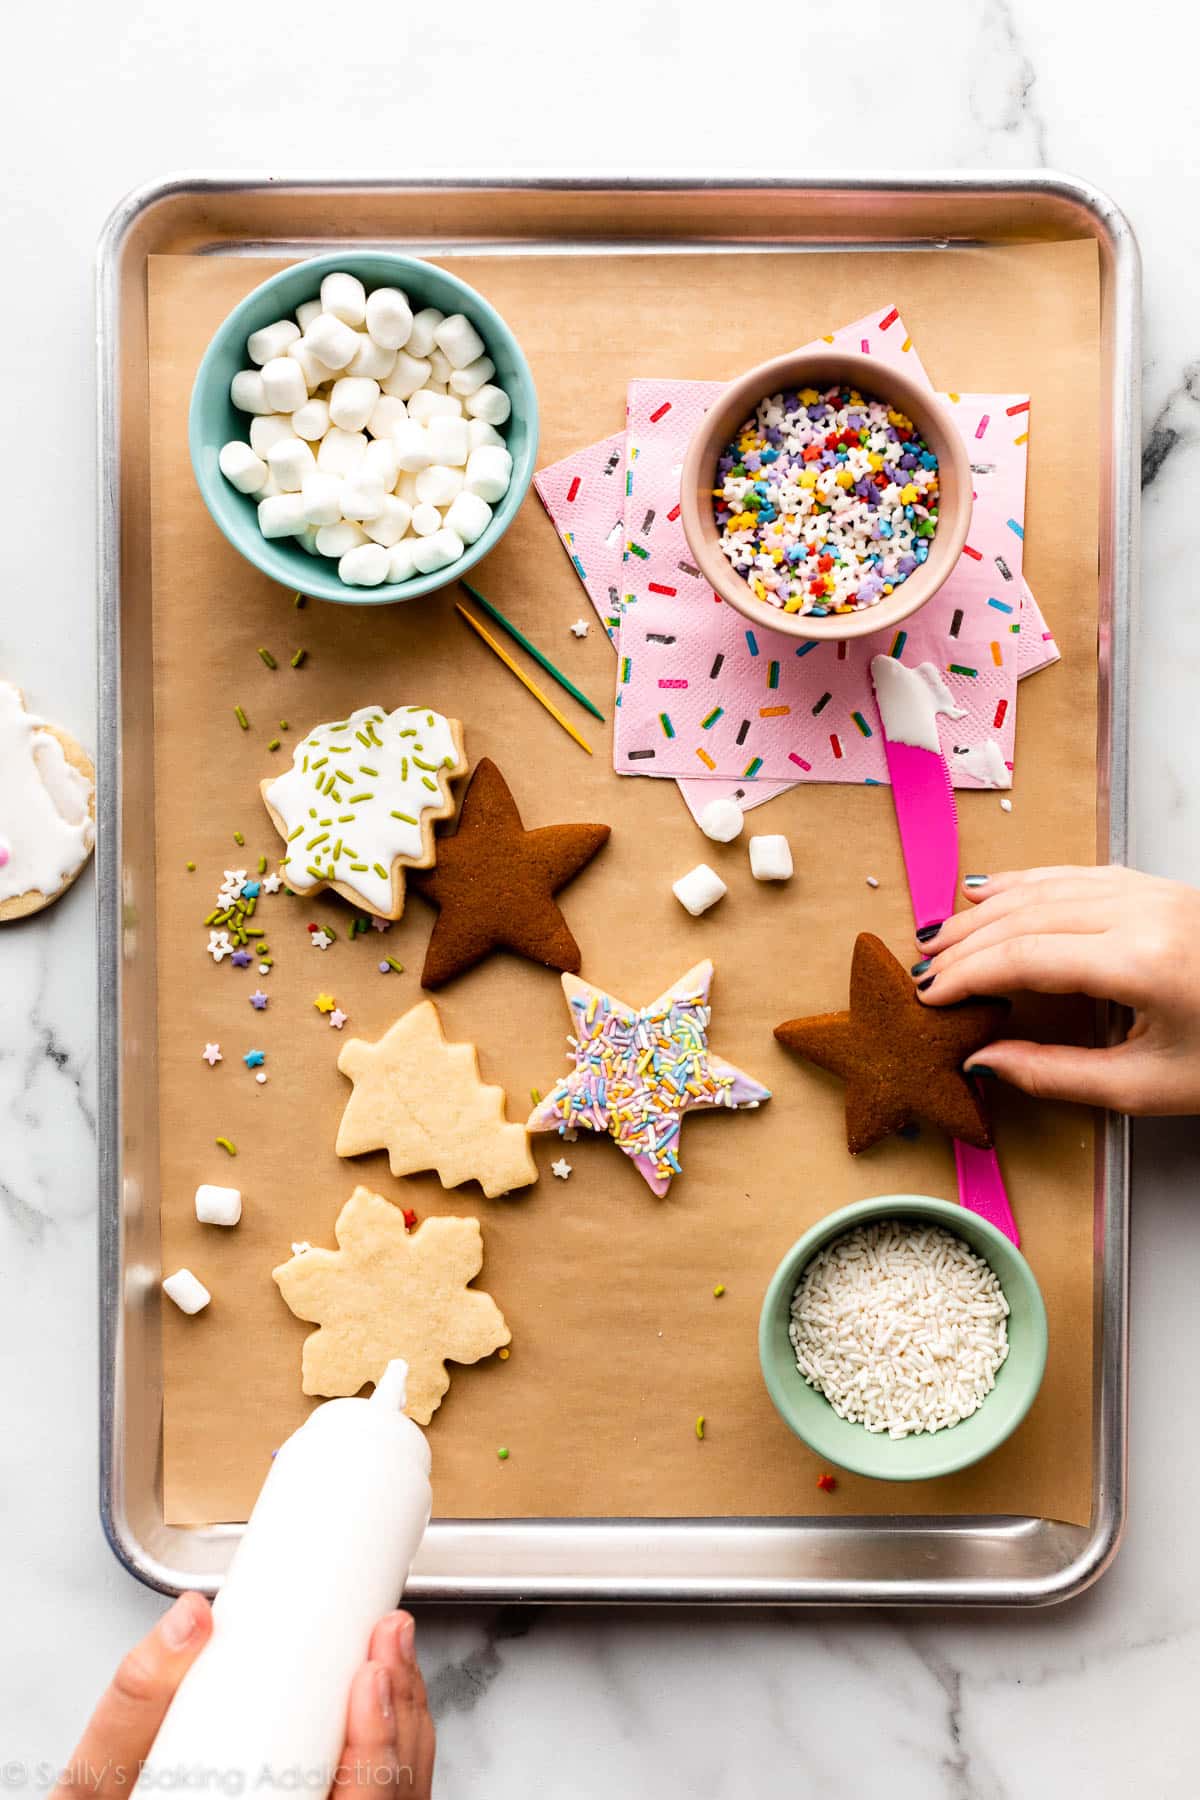 cookie decorating station with cookies, icing, and sprinkles on a lined baking sheet